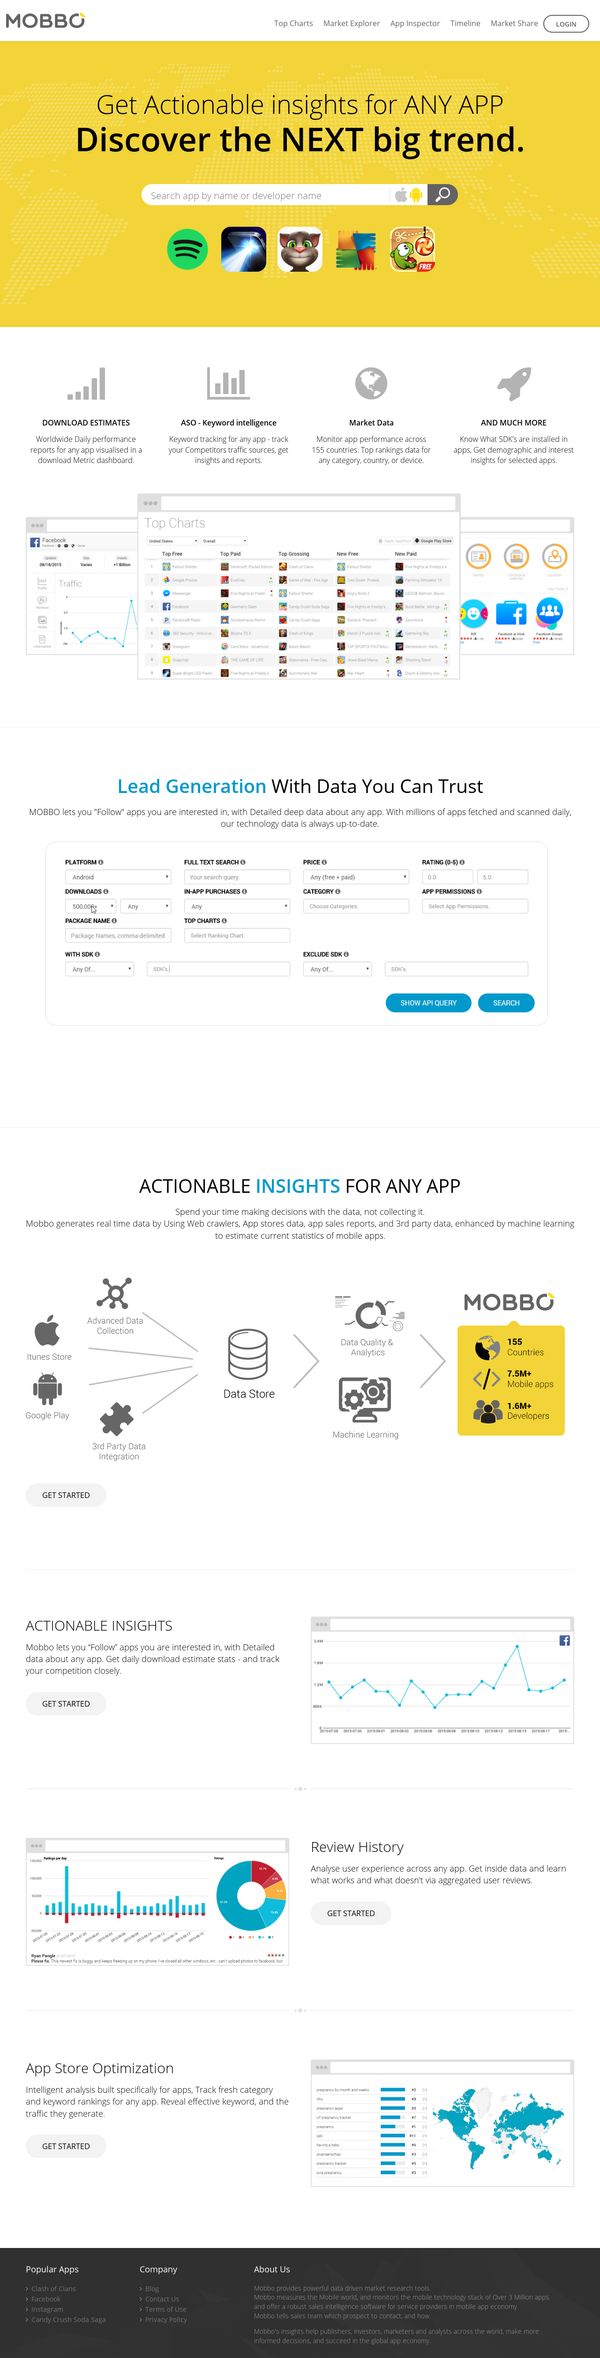 Mobbo - Actionable insights for ANY APP | Mobbo